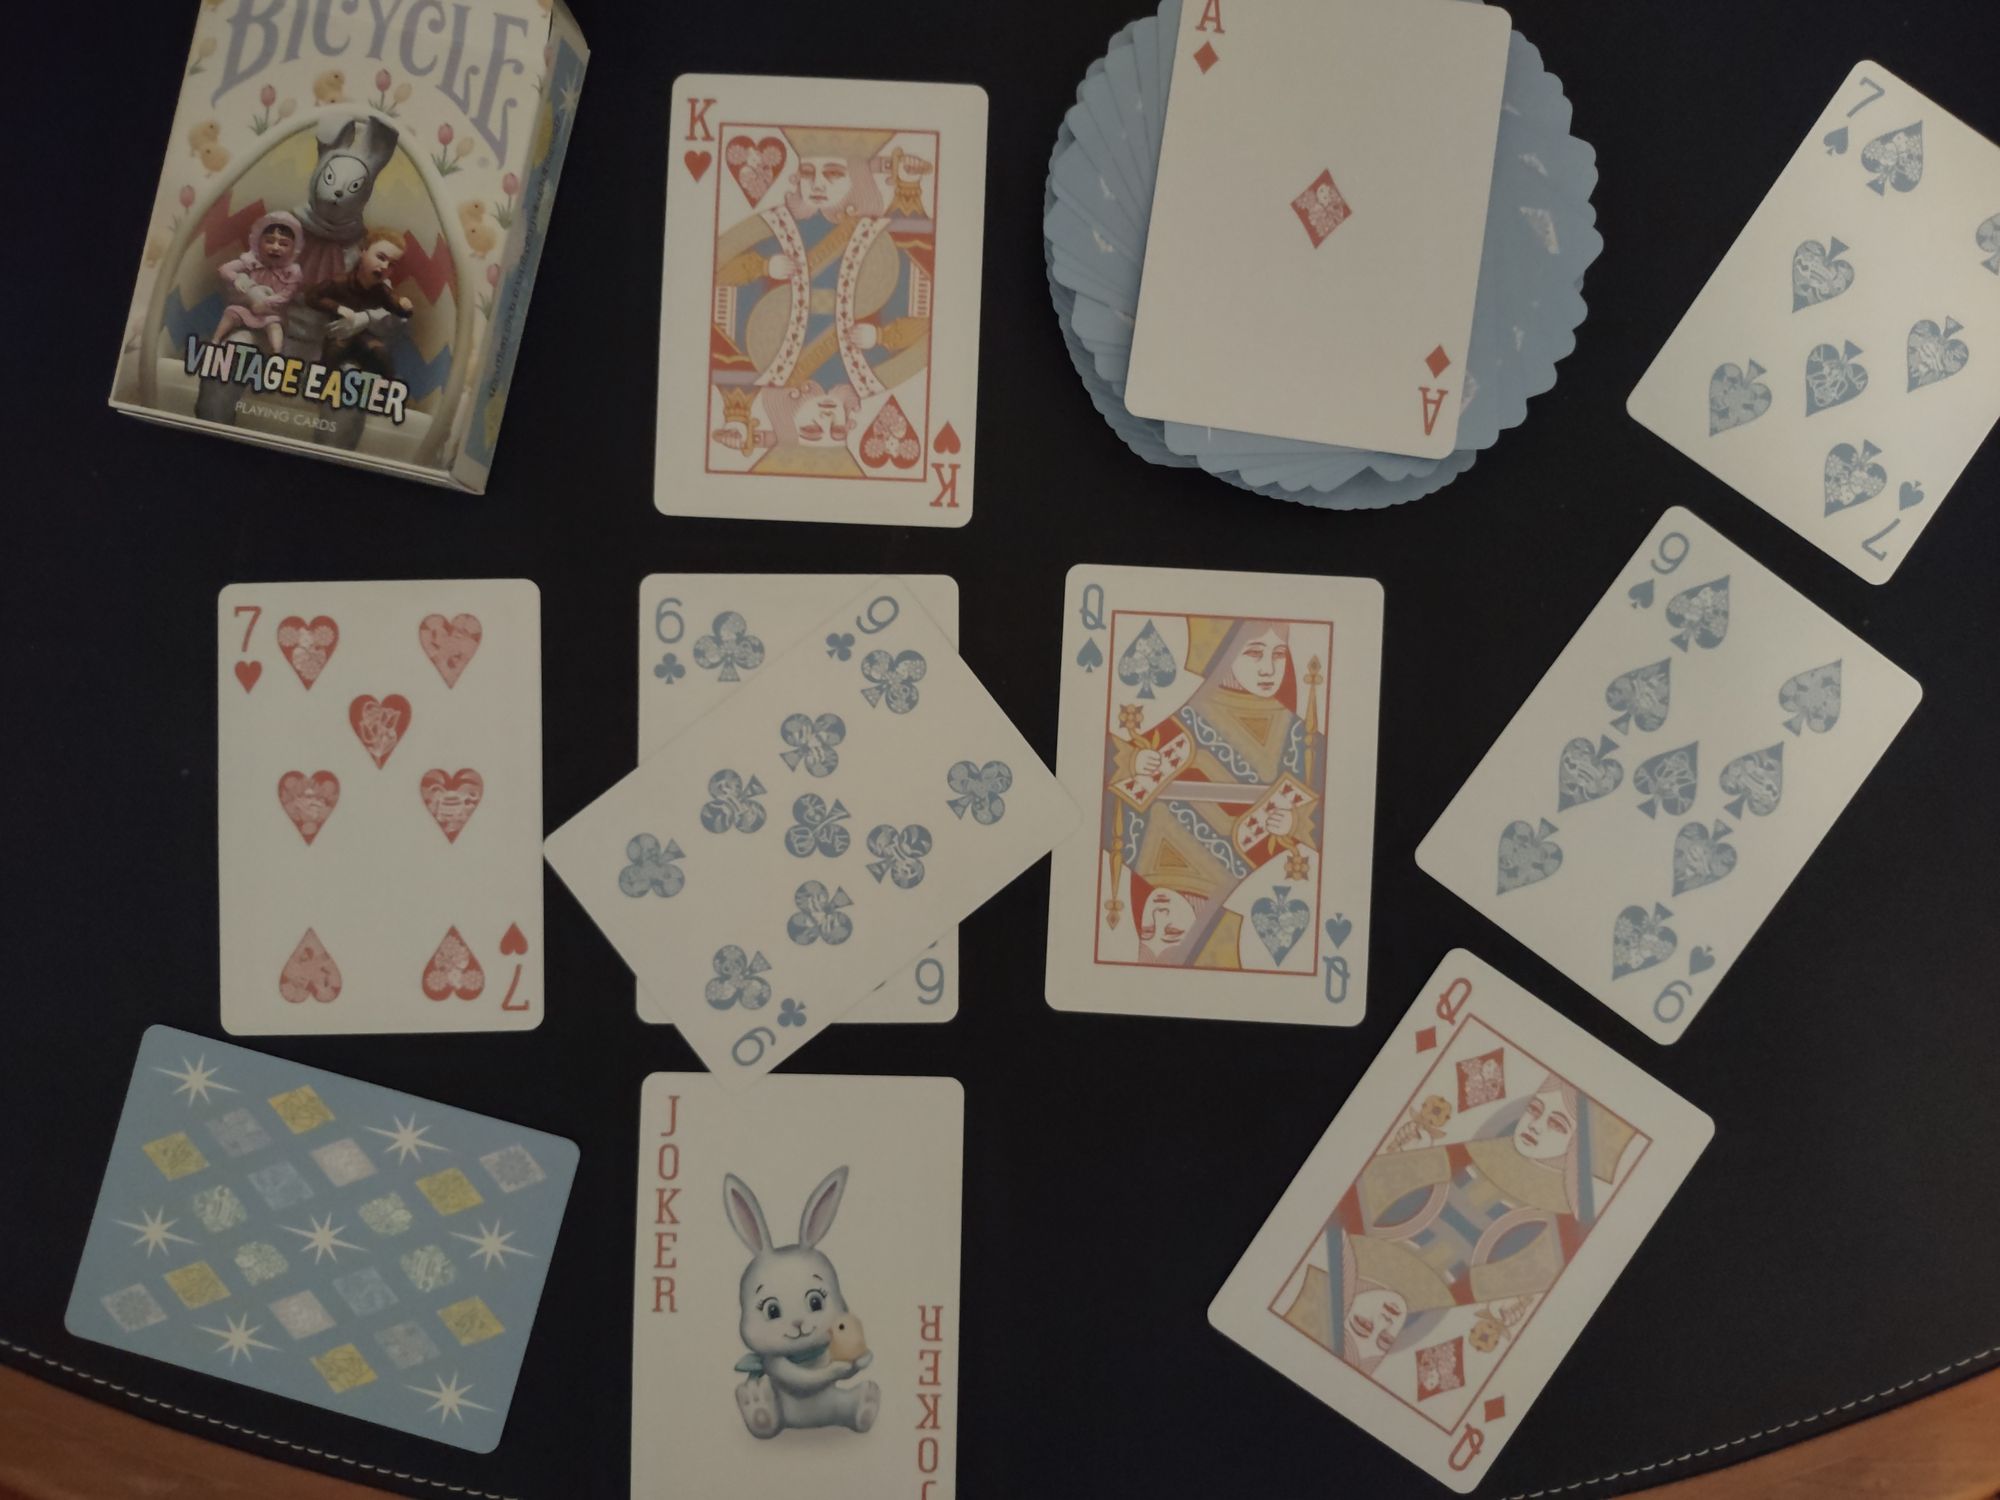 Ace of diamonds. From the Bicycle Vintage Easter deck.